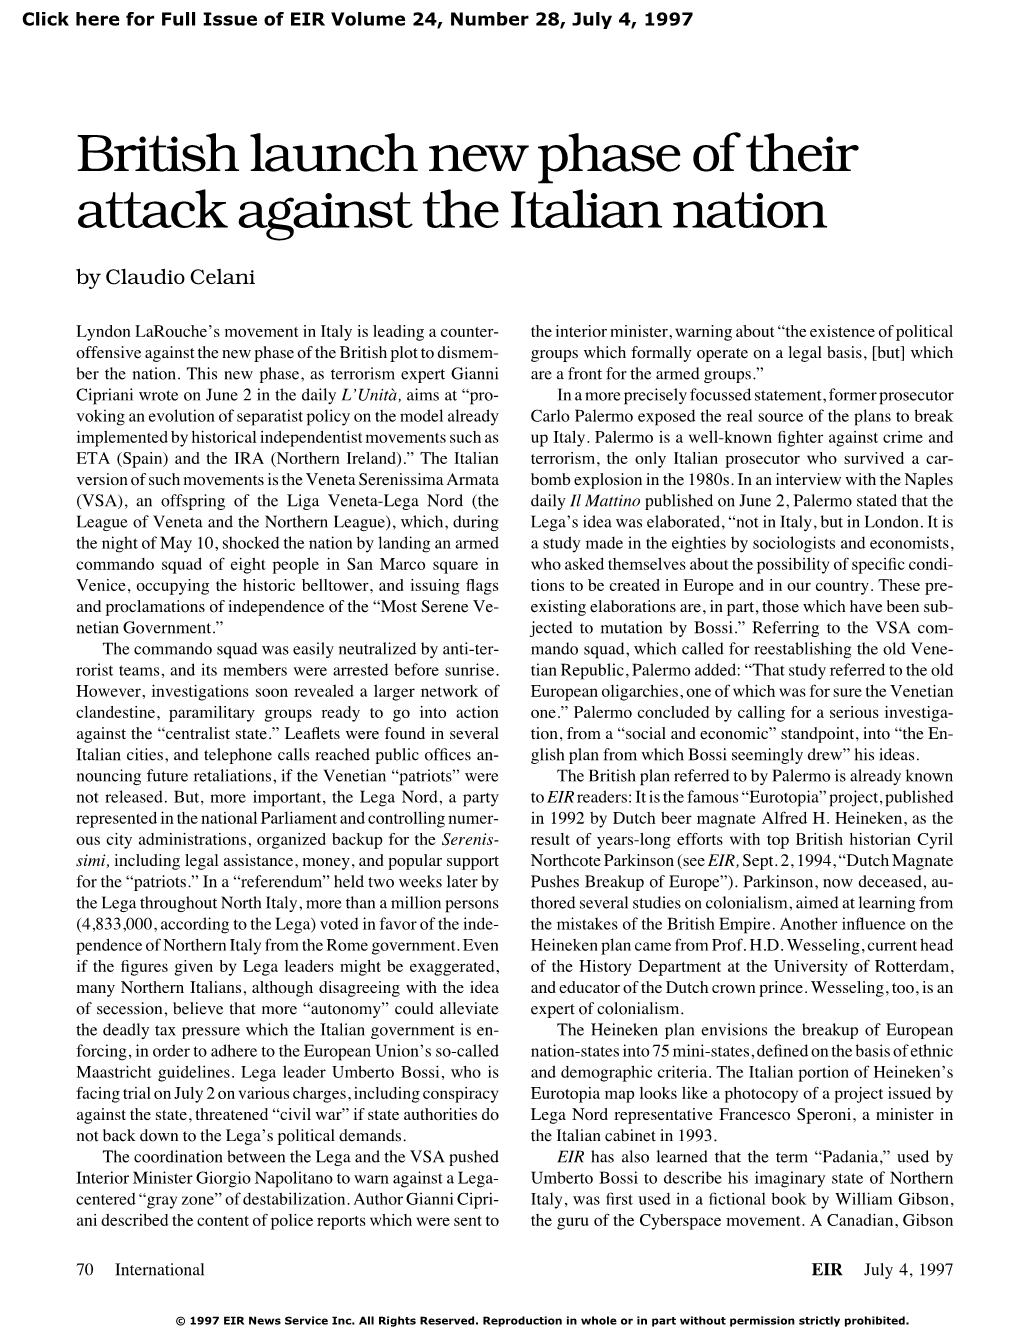 British Launch New Phase of Their Attack Against the Italian Nation